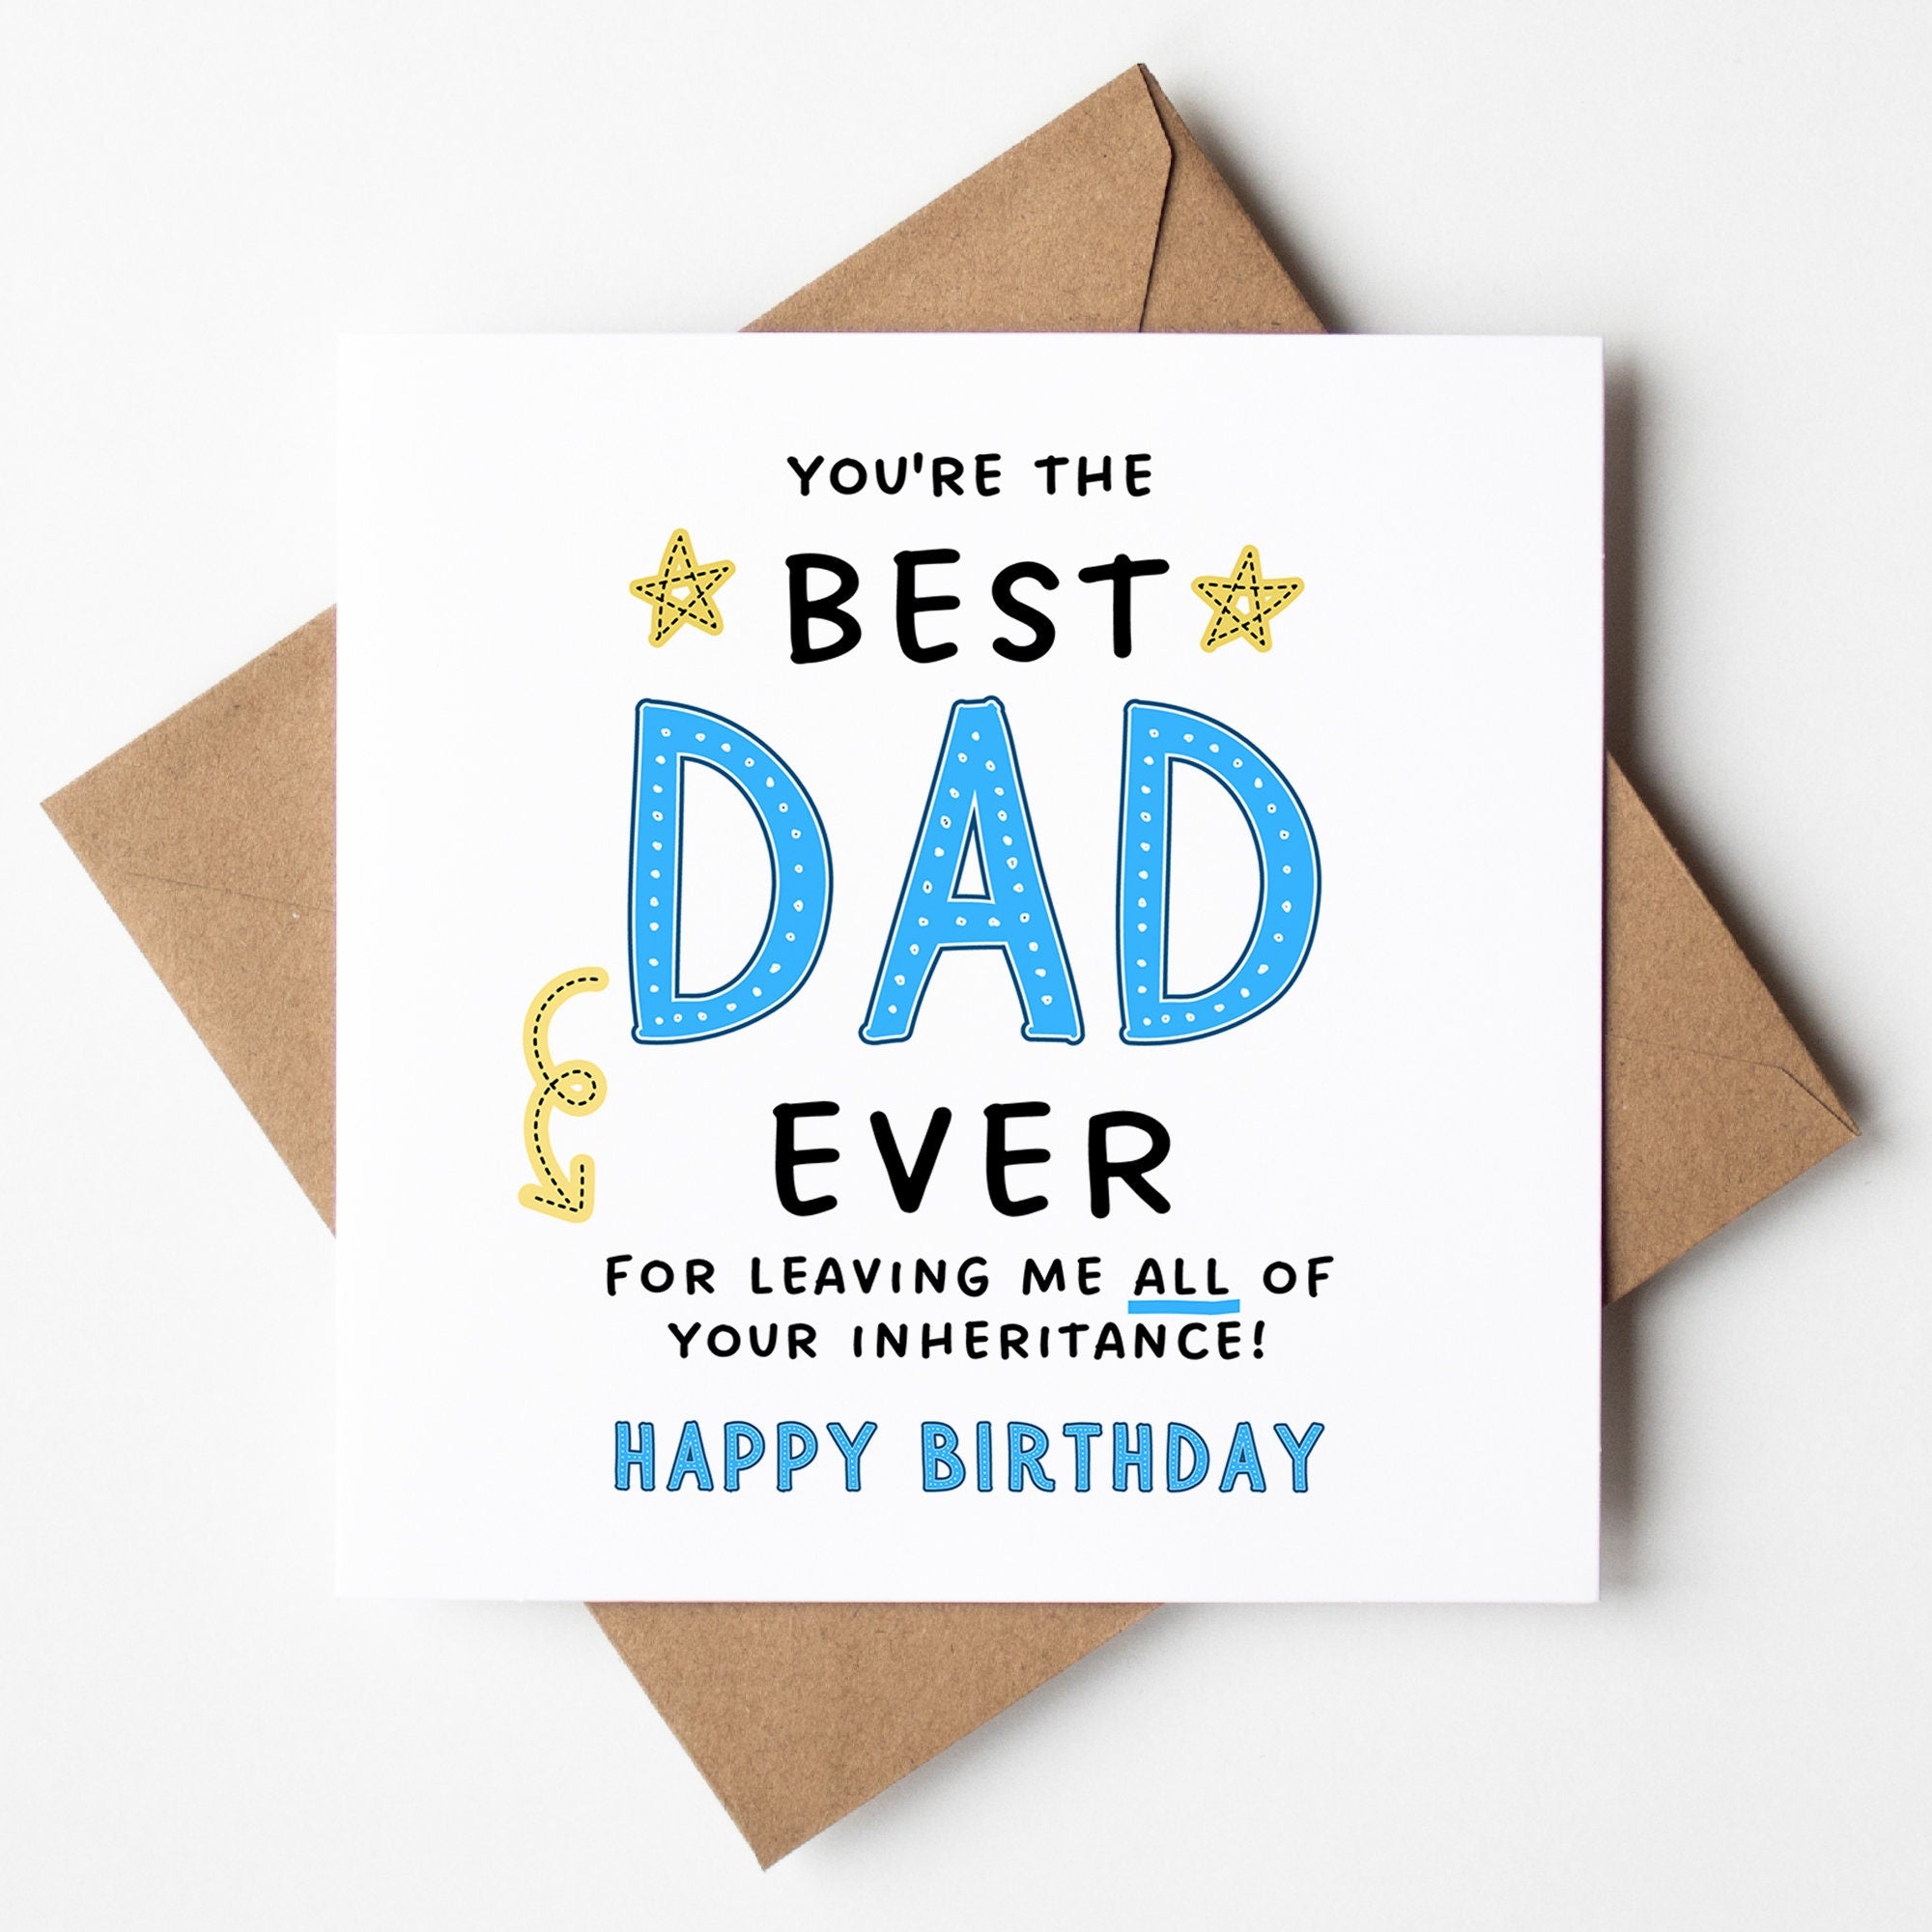 Best Dad Card, Funny Dad Birthday Card, Birthday Card From Daughter, Funny Card For Dad, Financial Burden, Happy Birthday Dad, From Son